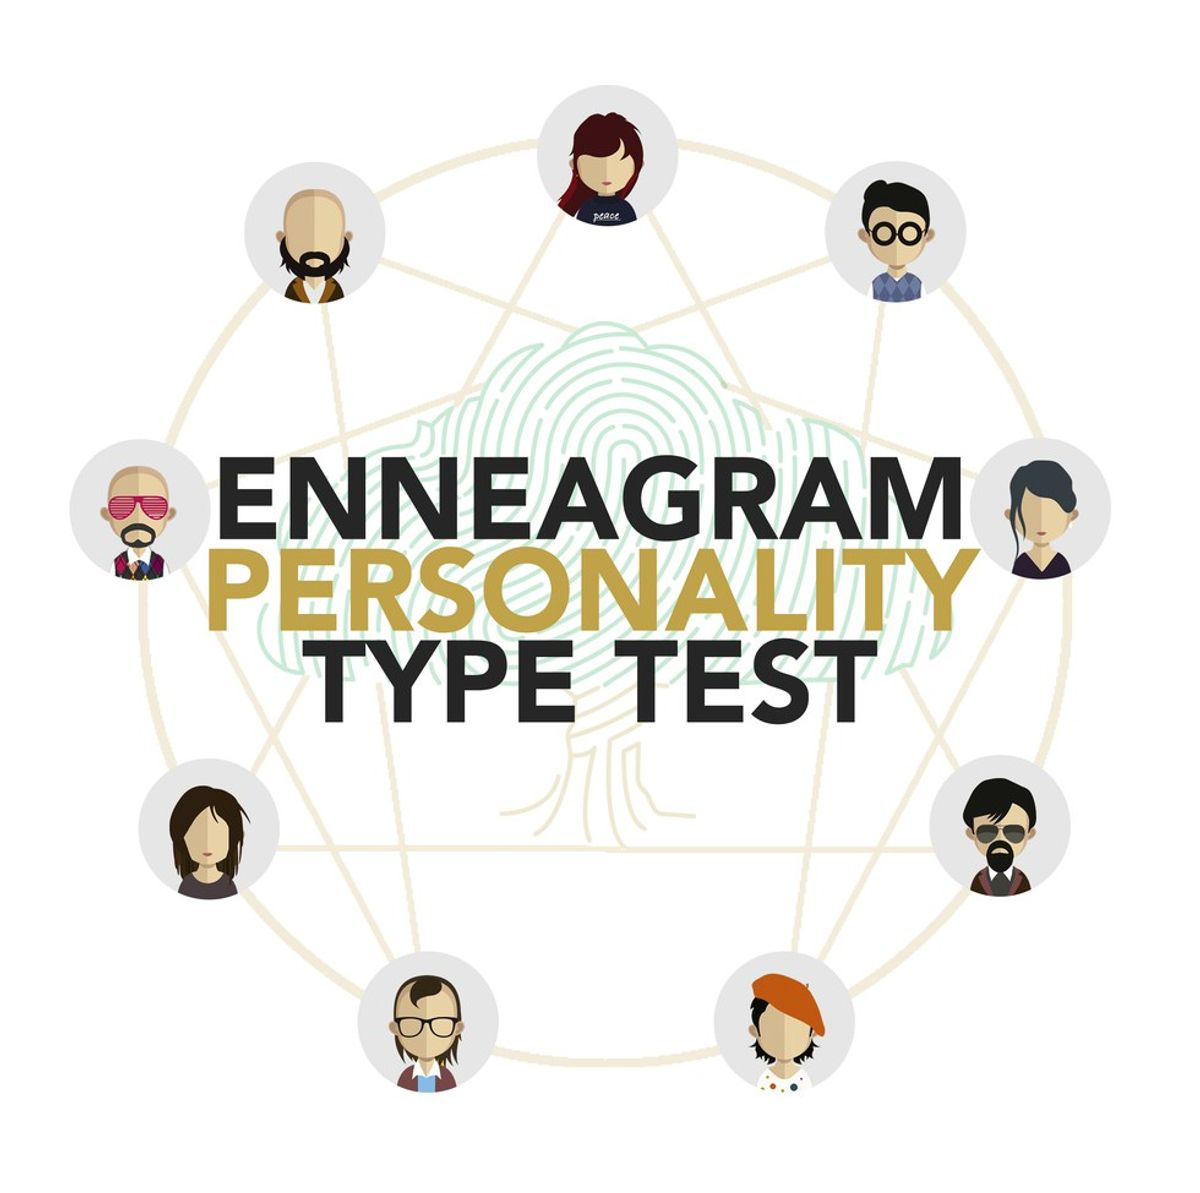 The Enneagram: The New Myers-Briggs